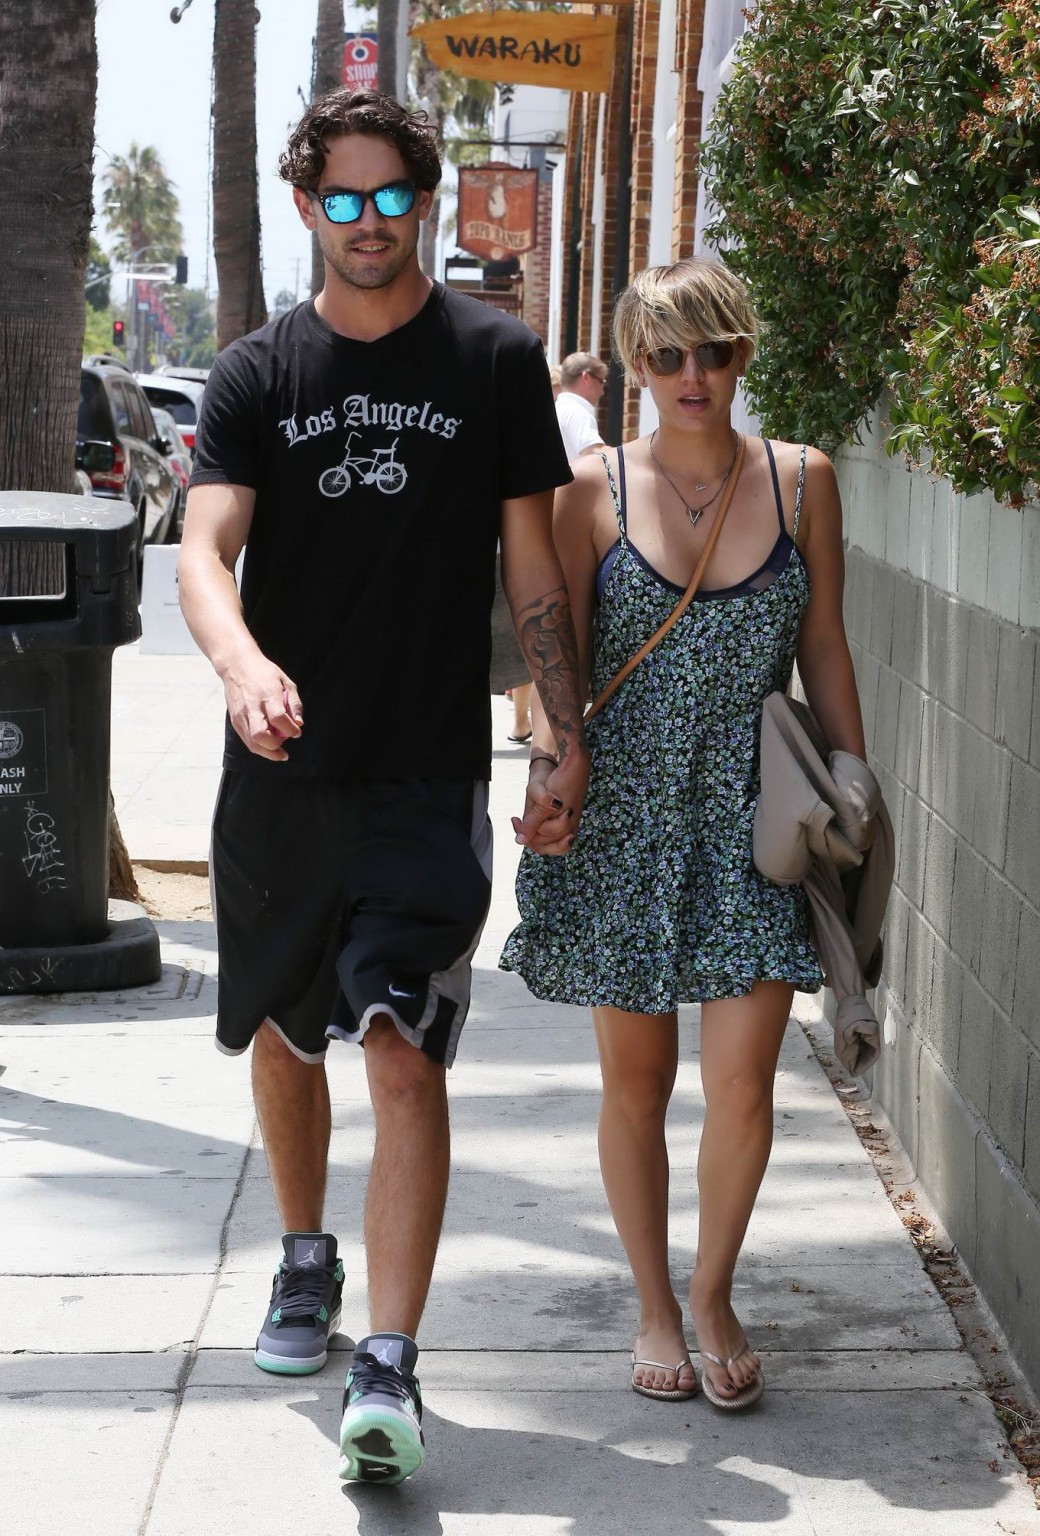 Kaley Cuoco boasting in her full bra all over Los Angeles #75193245